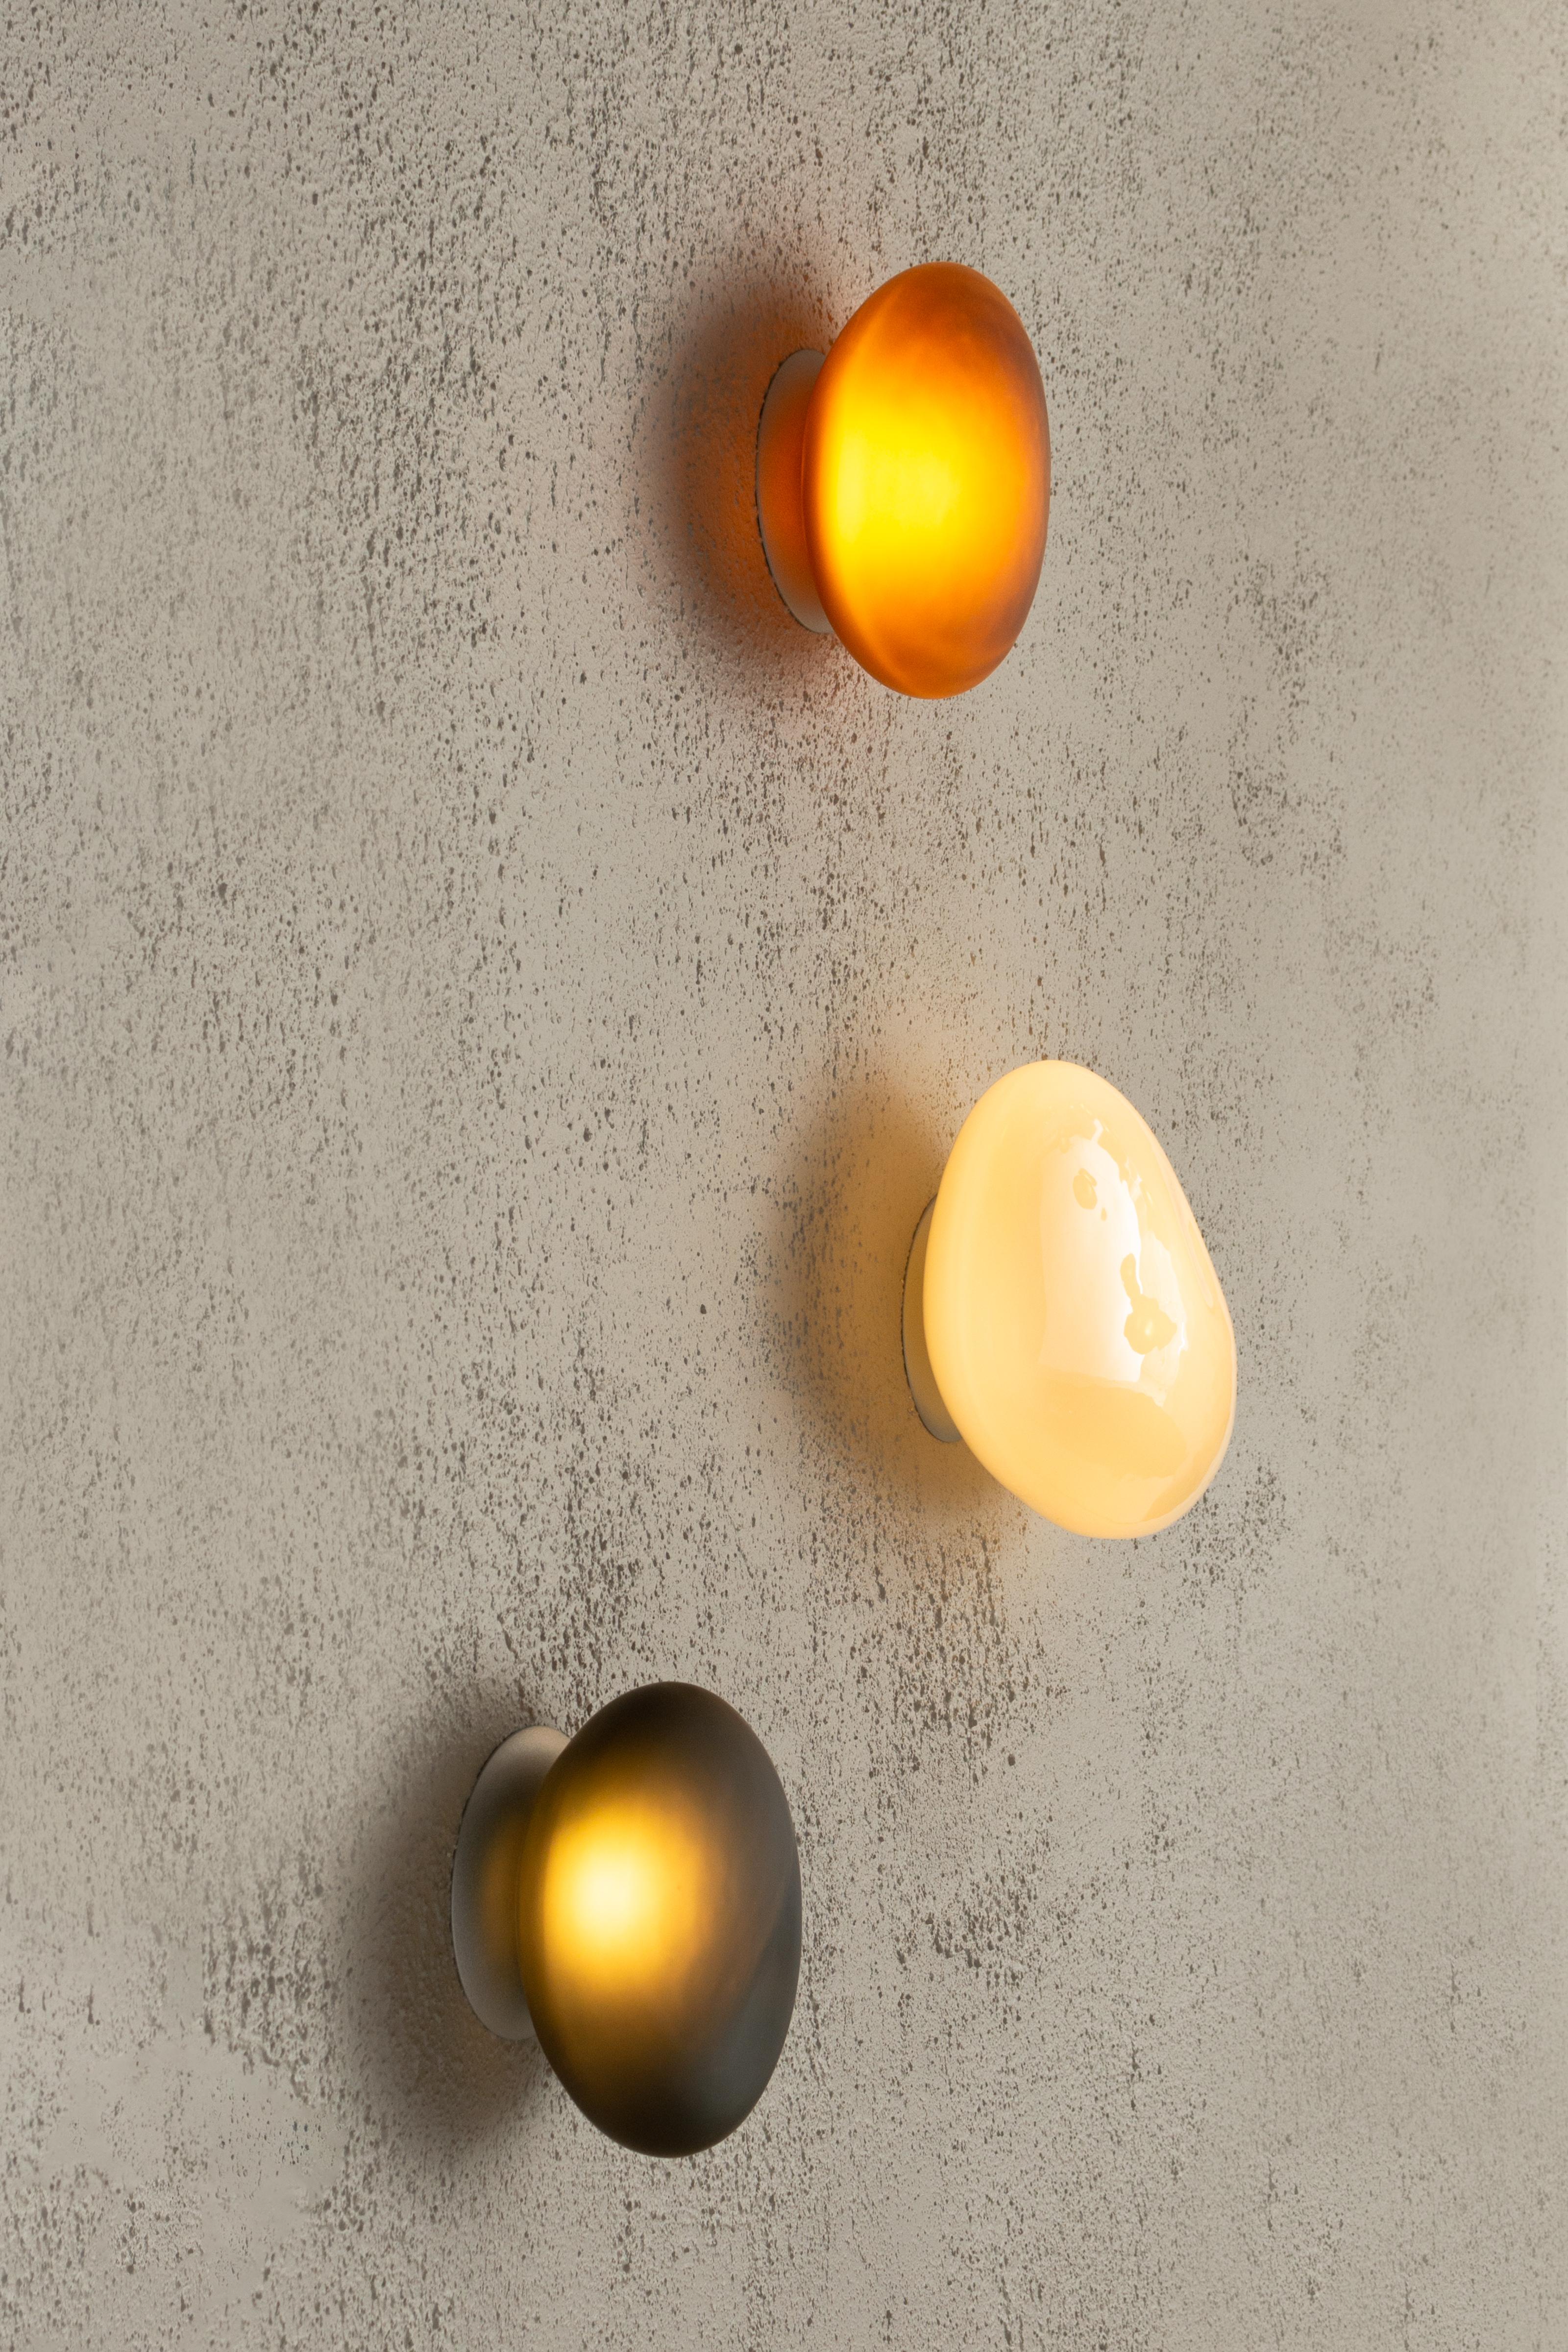 Contemporary wall lamp pebble 

Electrical : 
Voltage: 110 – 277V / 220 – 240V
Integral LED source : 1 x 9W LED

The model shown in picture:
Dimensions: A: 30.5 x 21 x 18 cm 
Color: Slate
______
Pebble
The Pebble series celebrates the